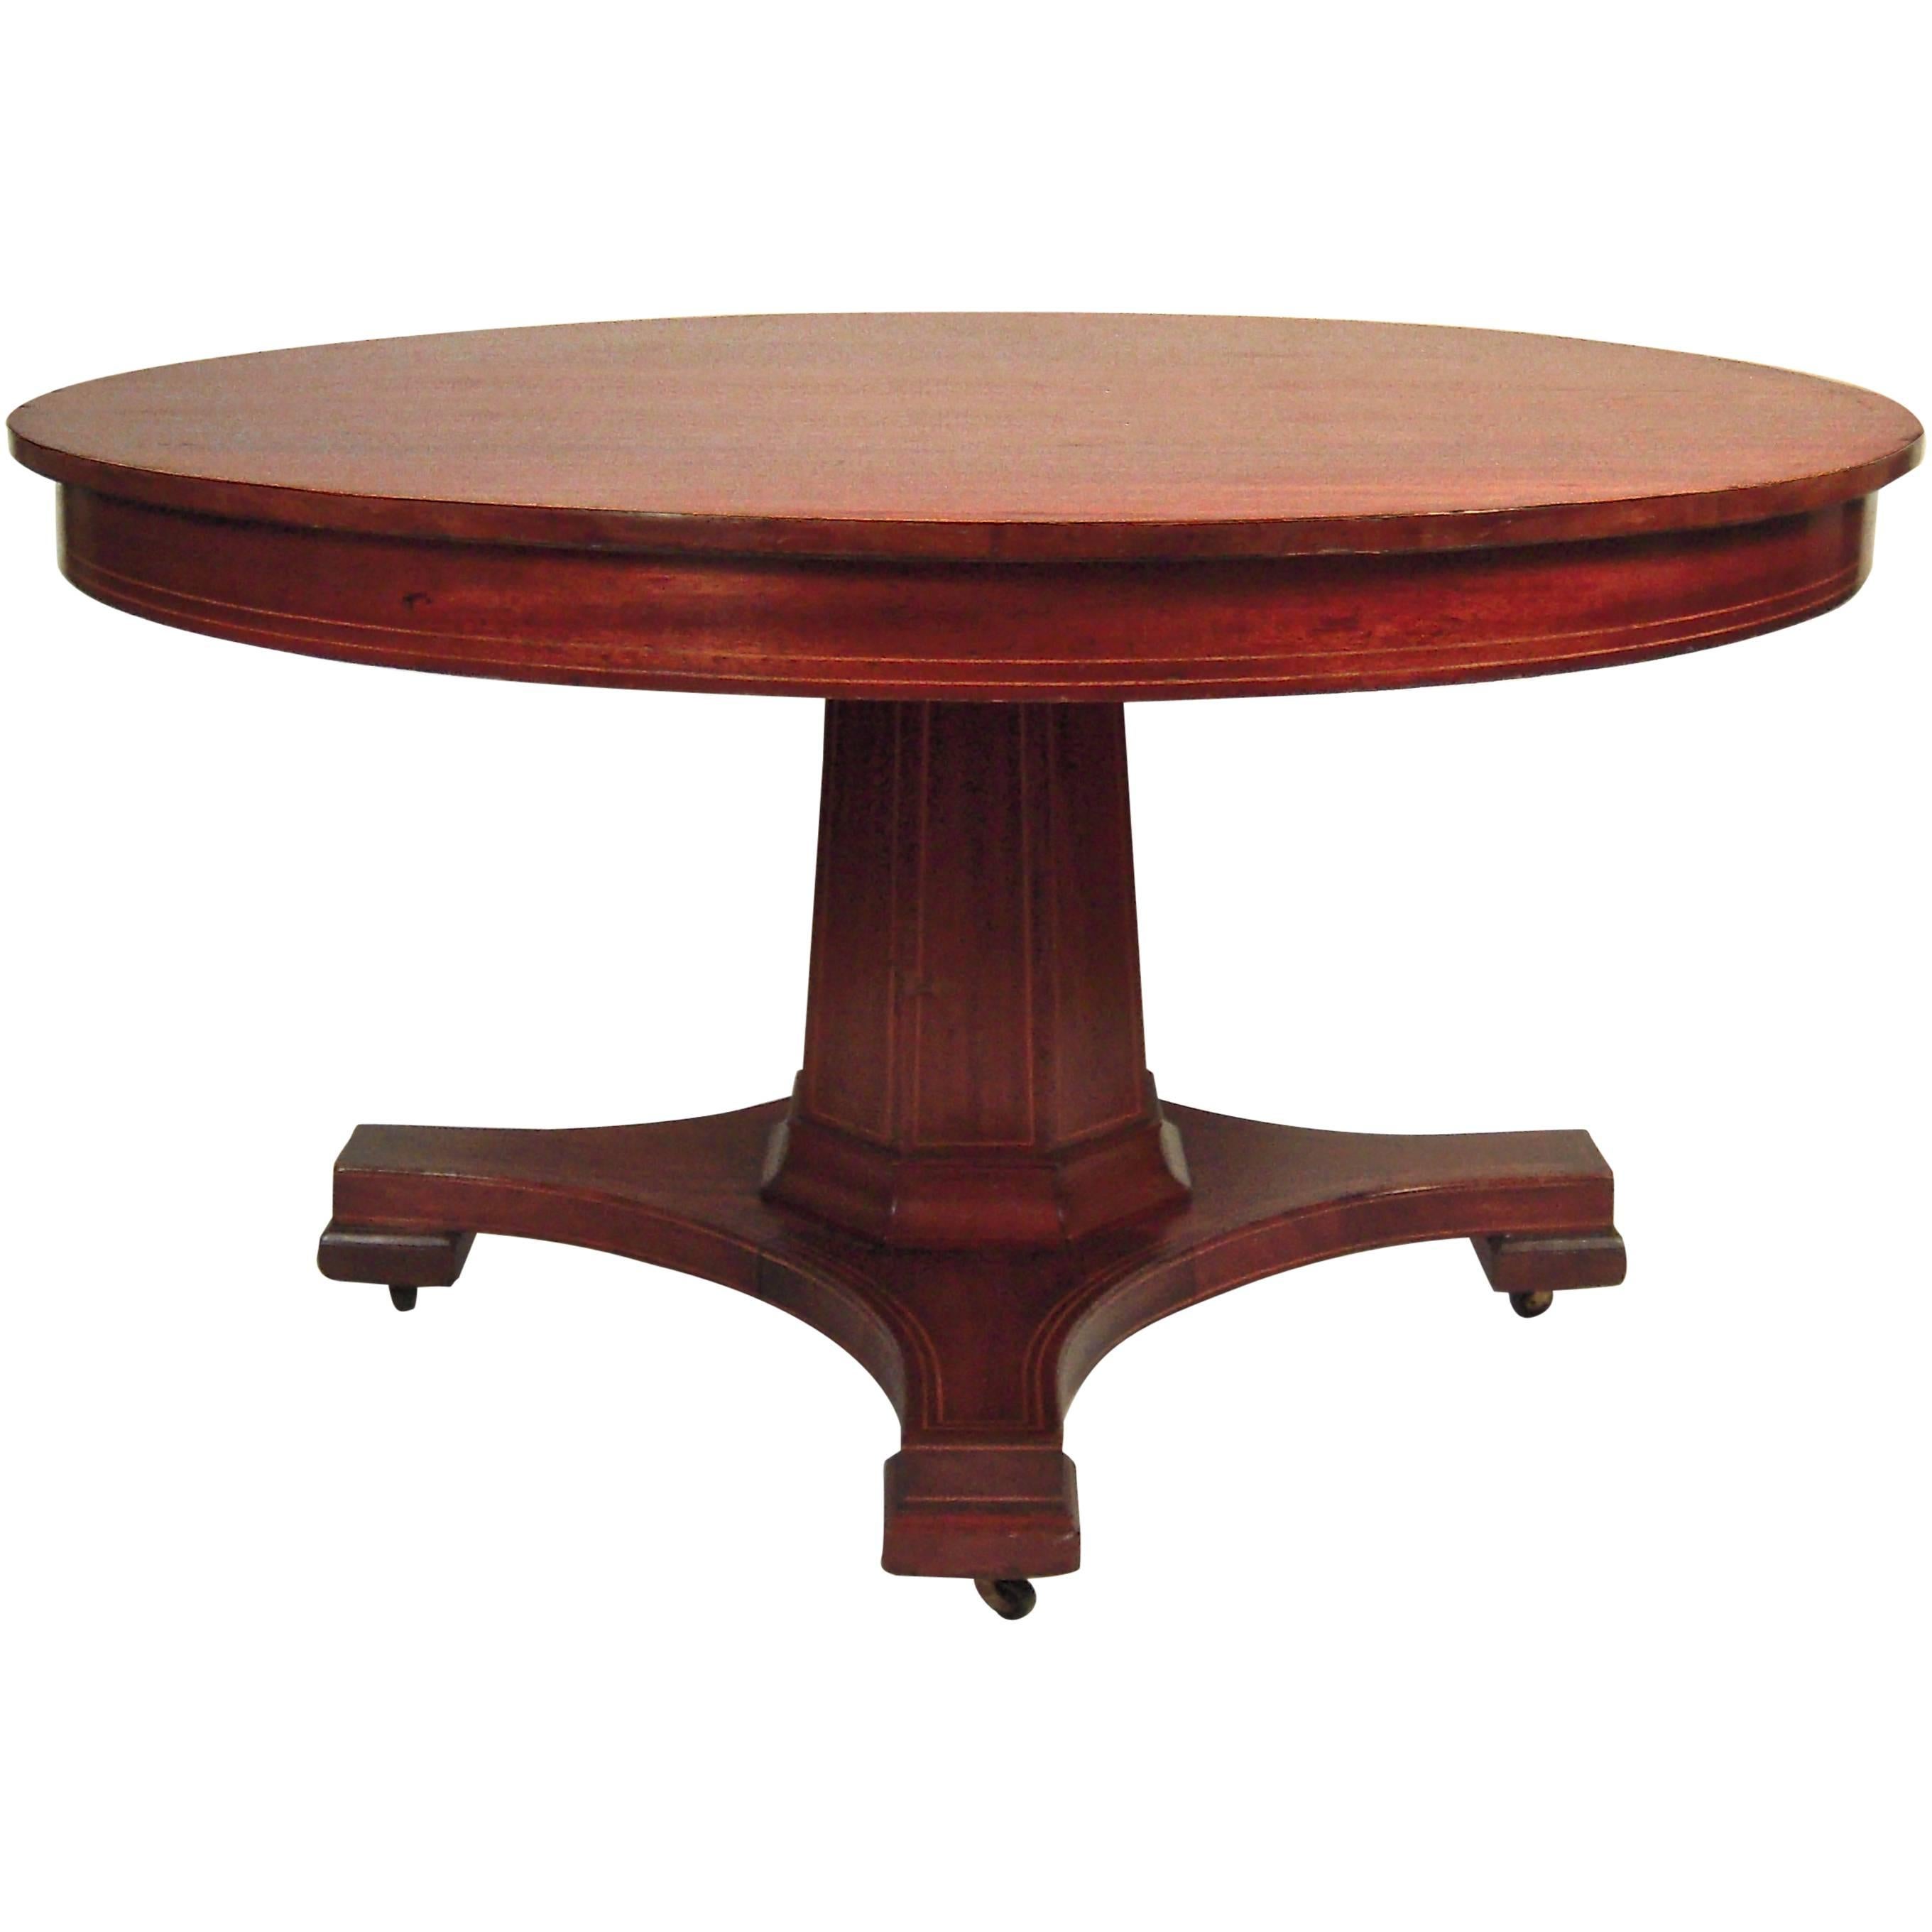 Inlaid Mahogany Round Extension Dining Table 54" Diameter